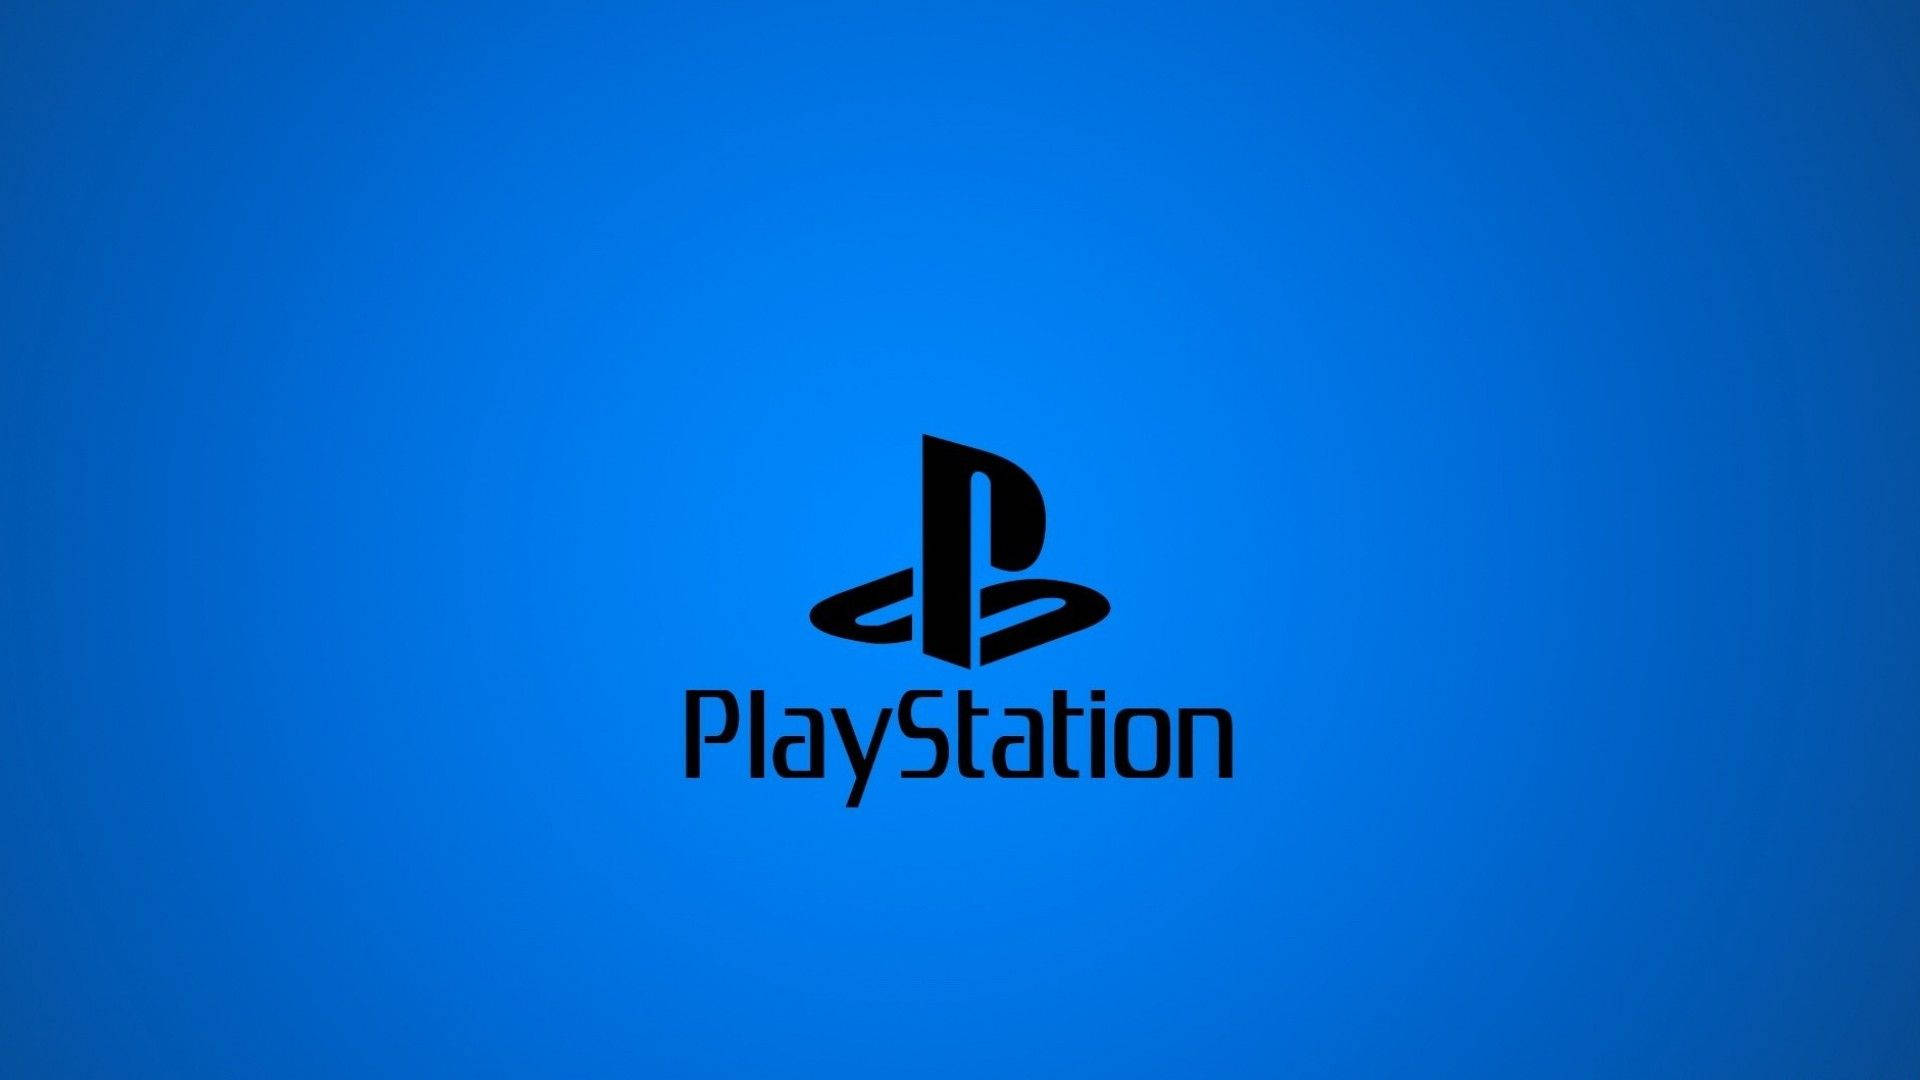 Playstation 1920X1080 Wallpaper and Background Image